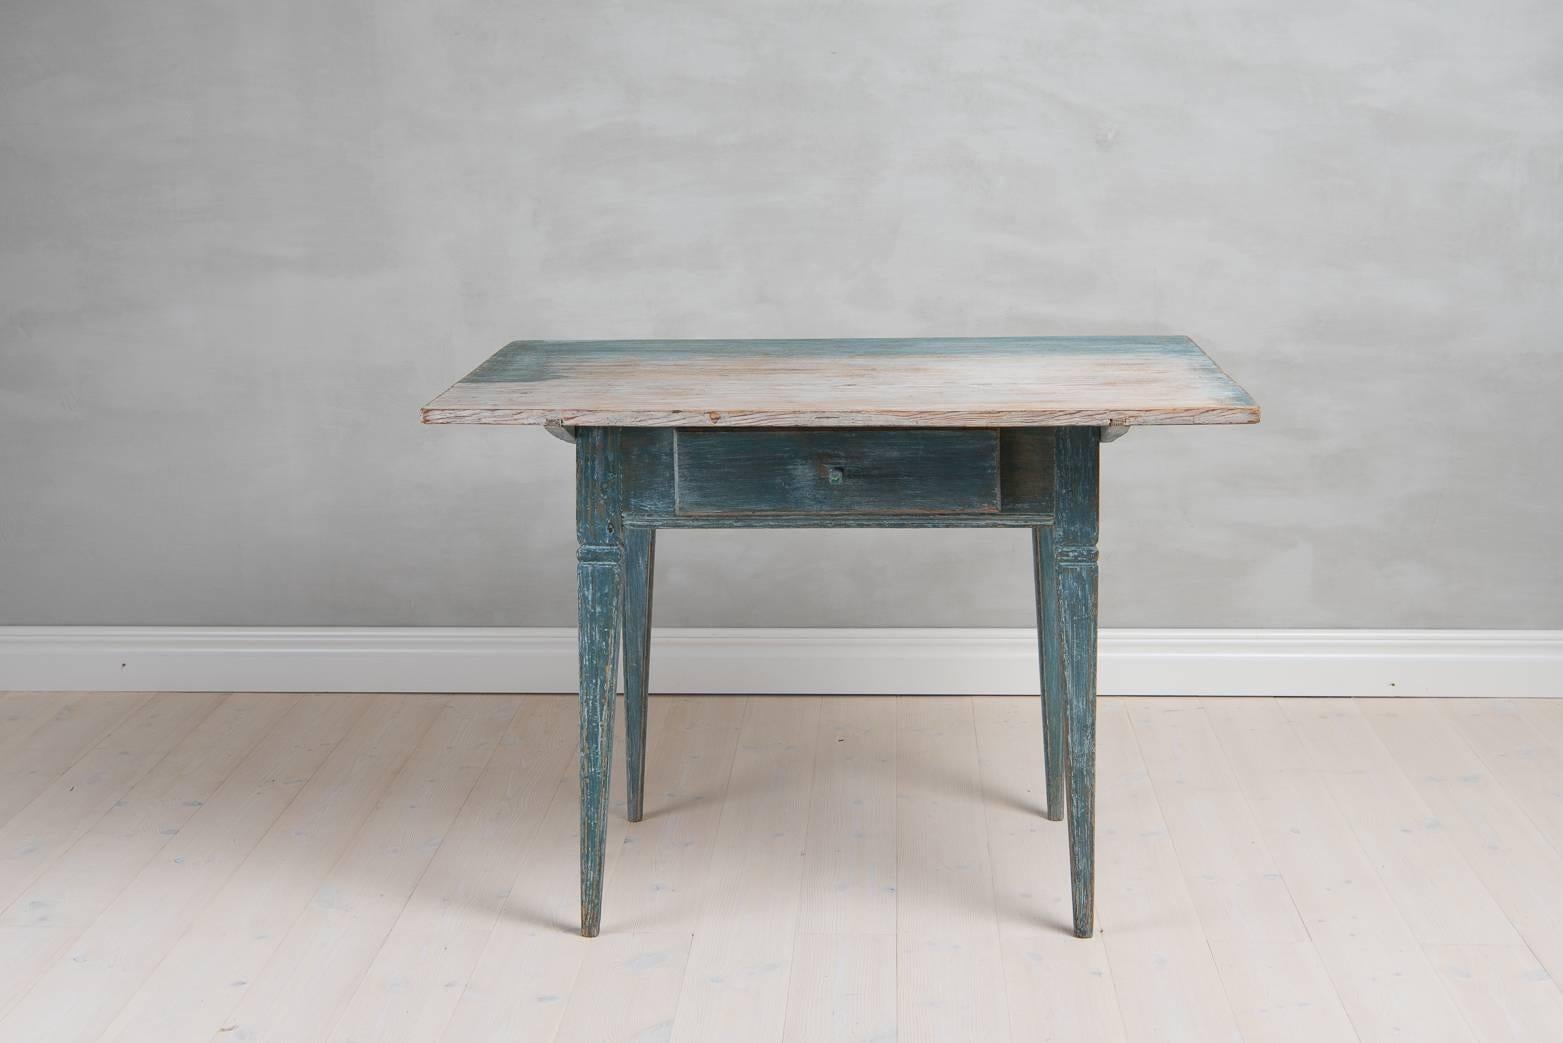 Period Gustavian table with one drawer. Straight, tapered legs. Detachable tabletop. Dry scraped to its original blue paint. Late 18th century, from Northern Sweden.
  